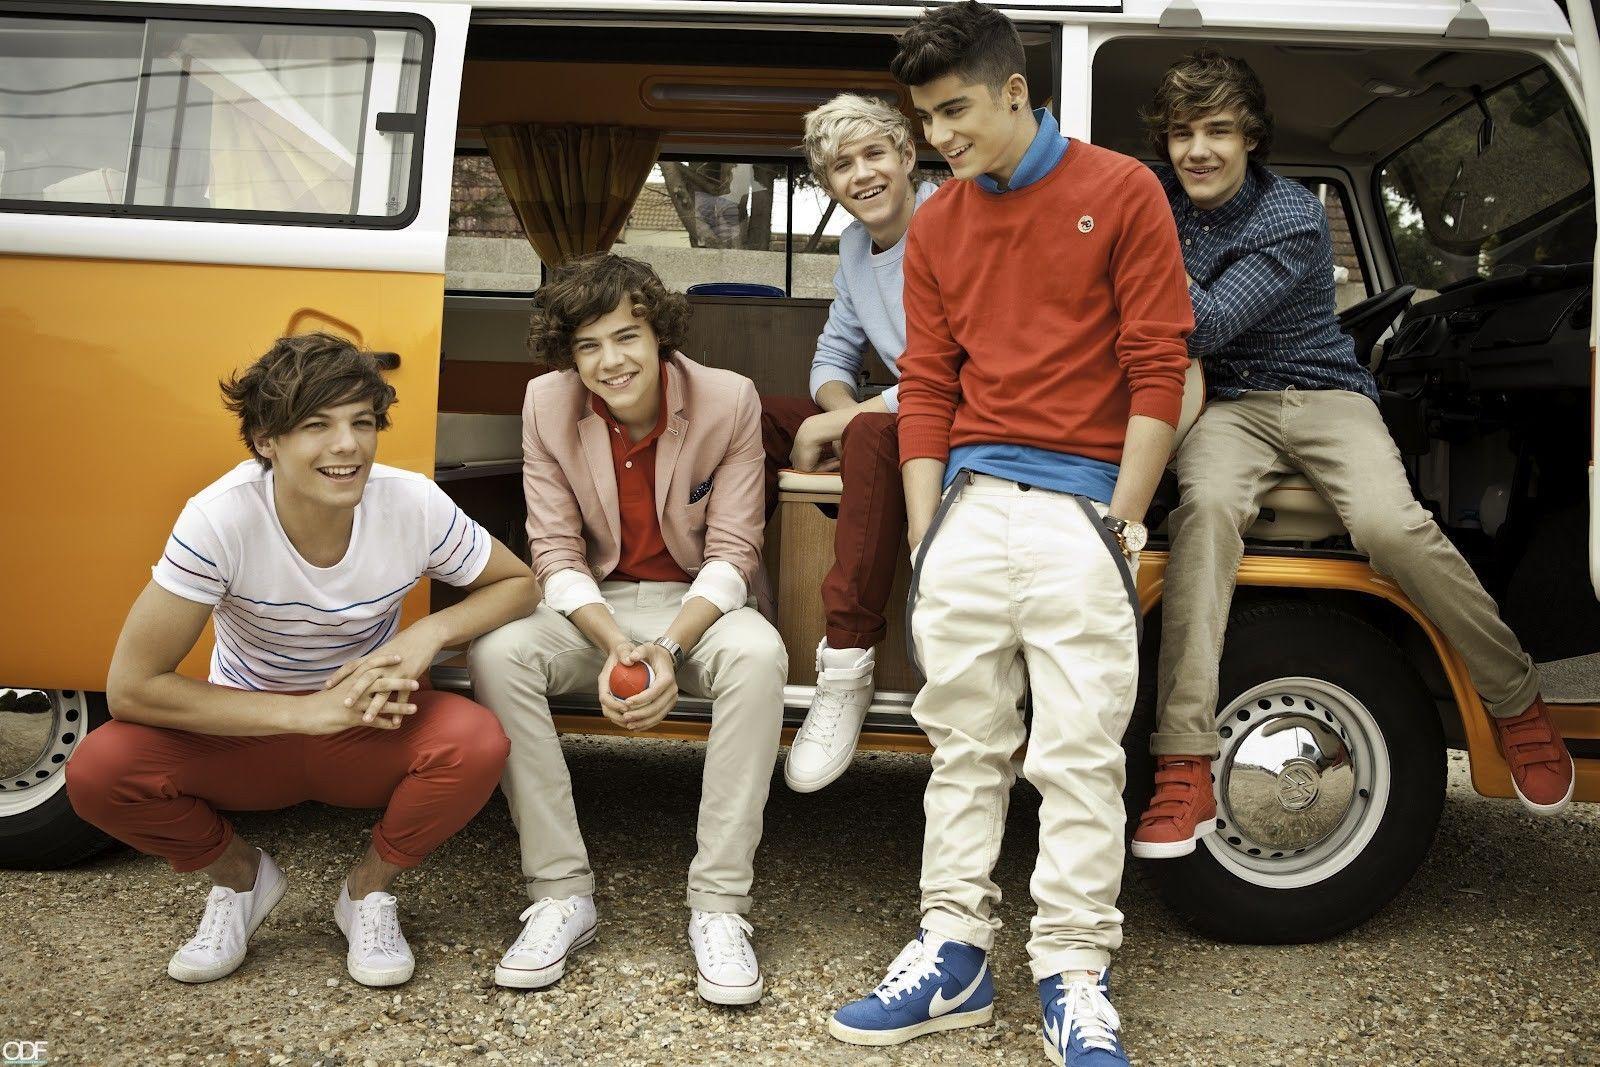 Pin One Direction 1024x768 Wallpaper 10